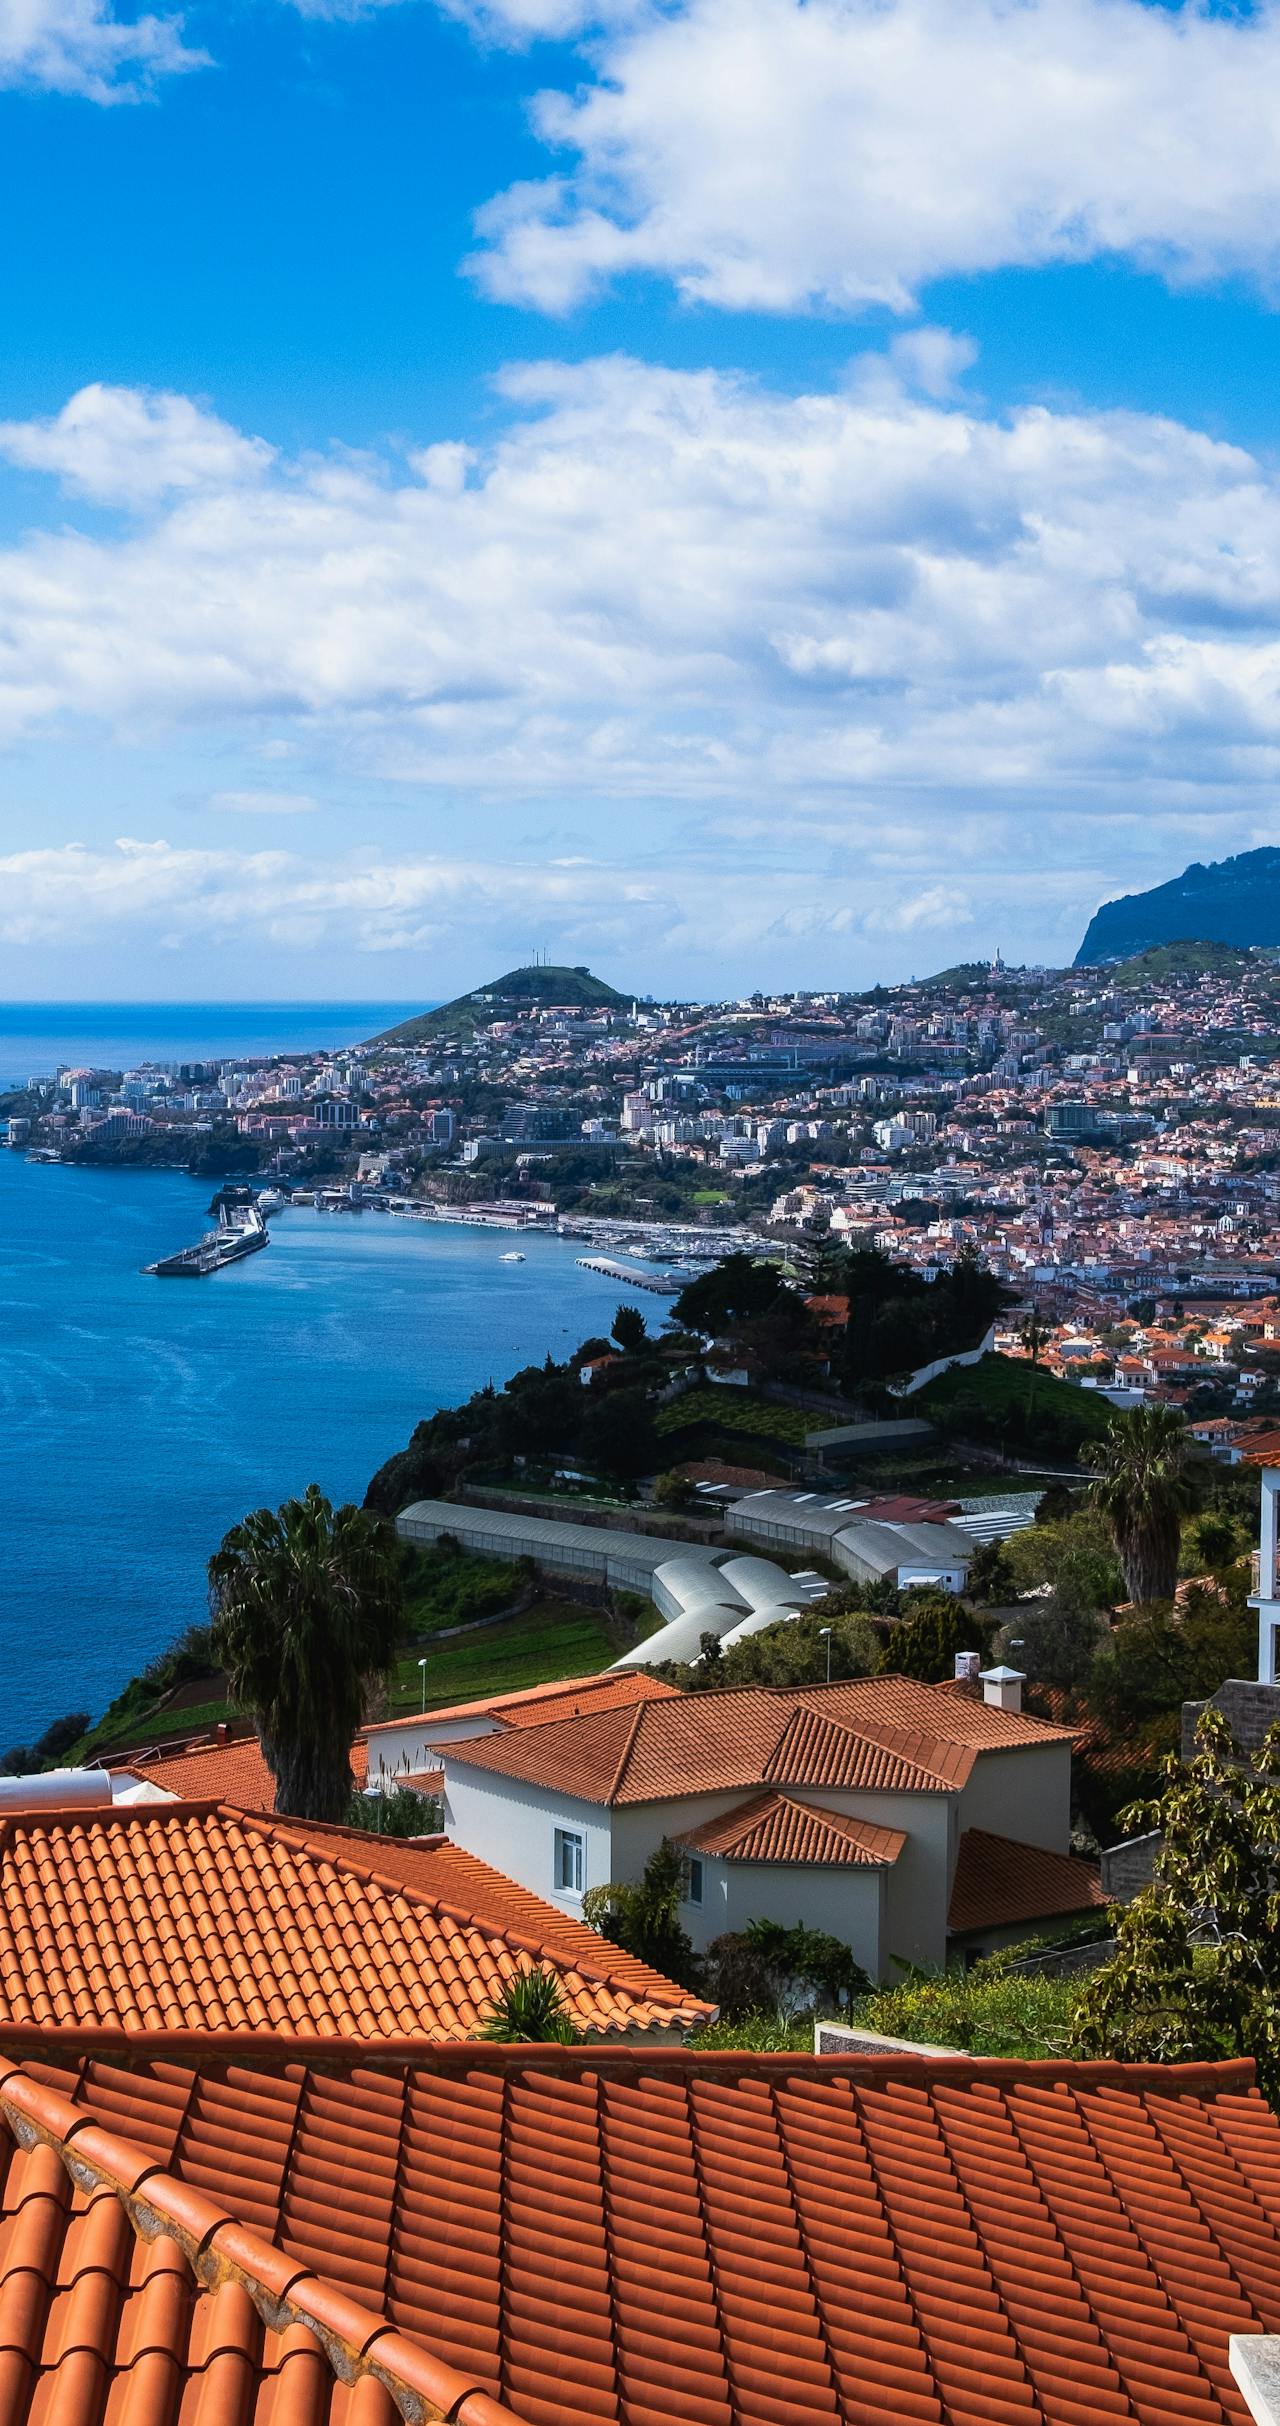 Coastal view of Funchal in the Madeira Archipelago